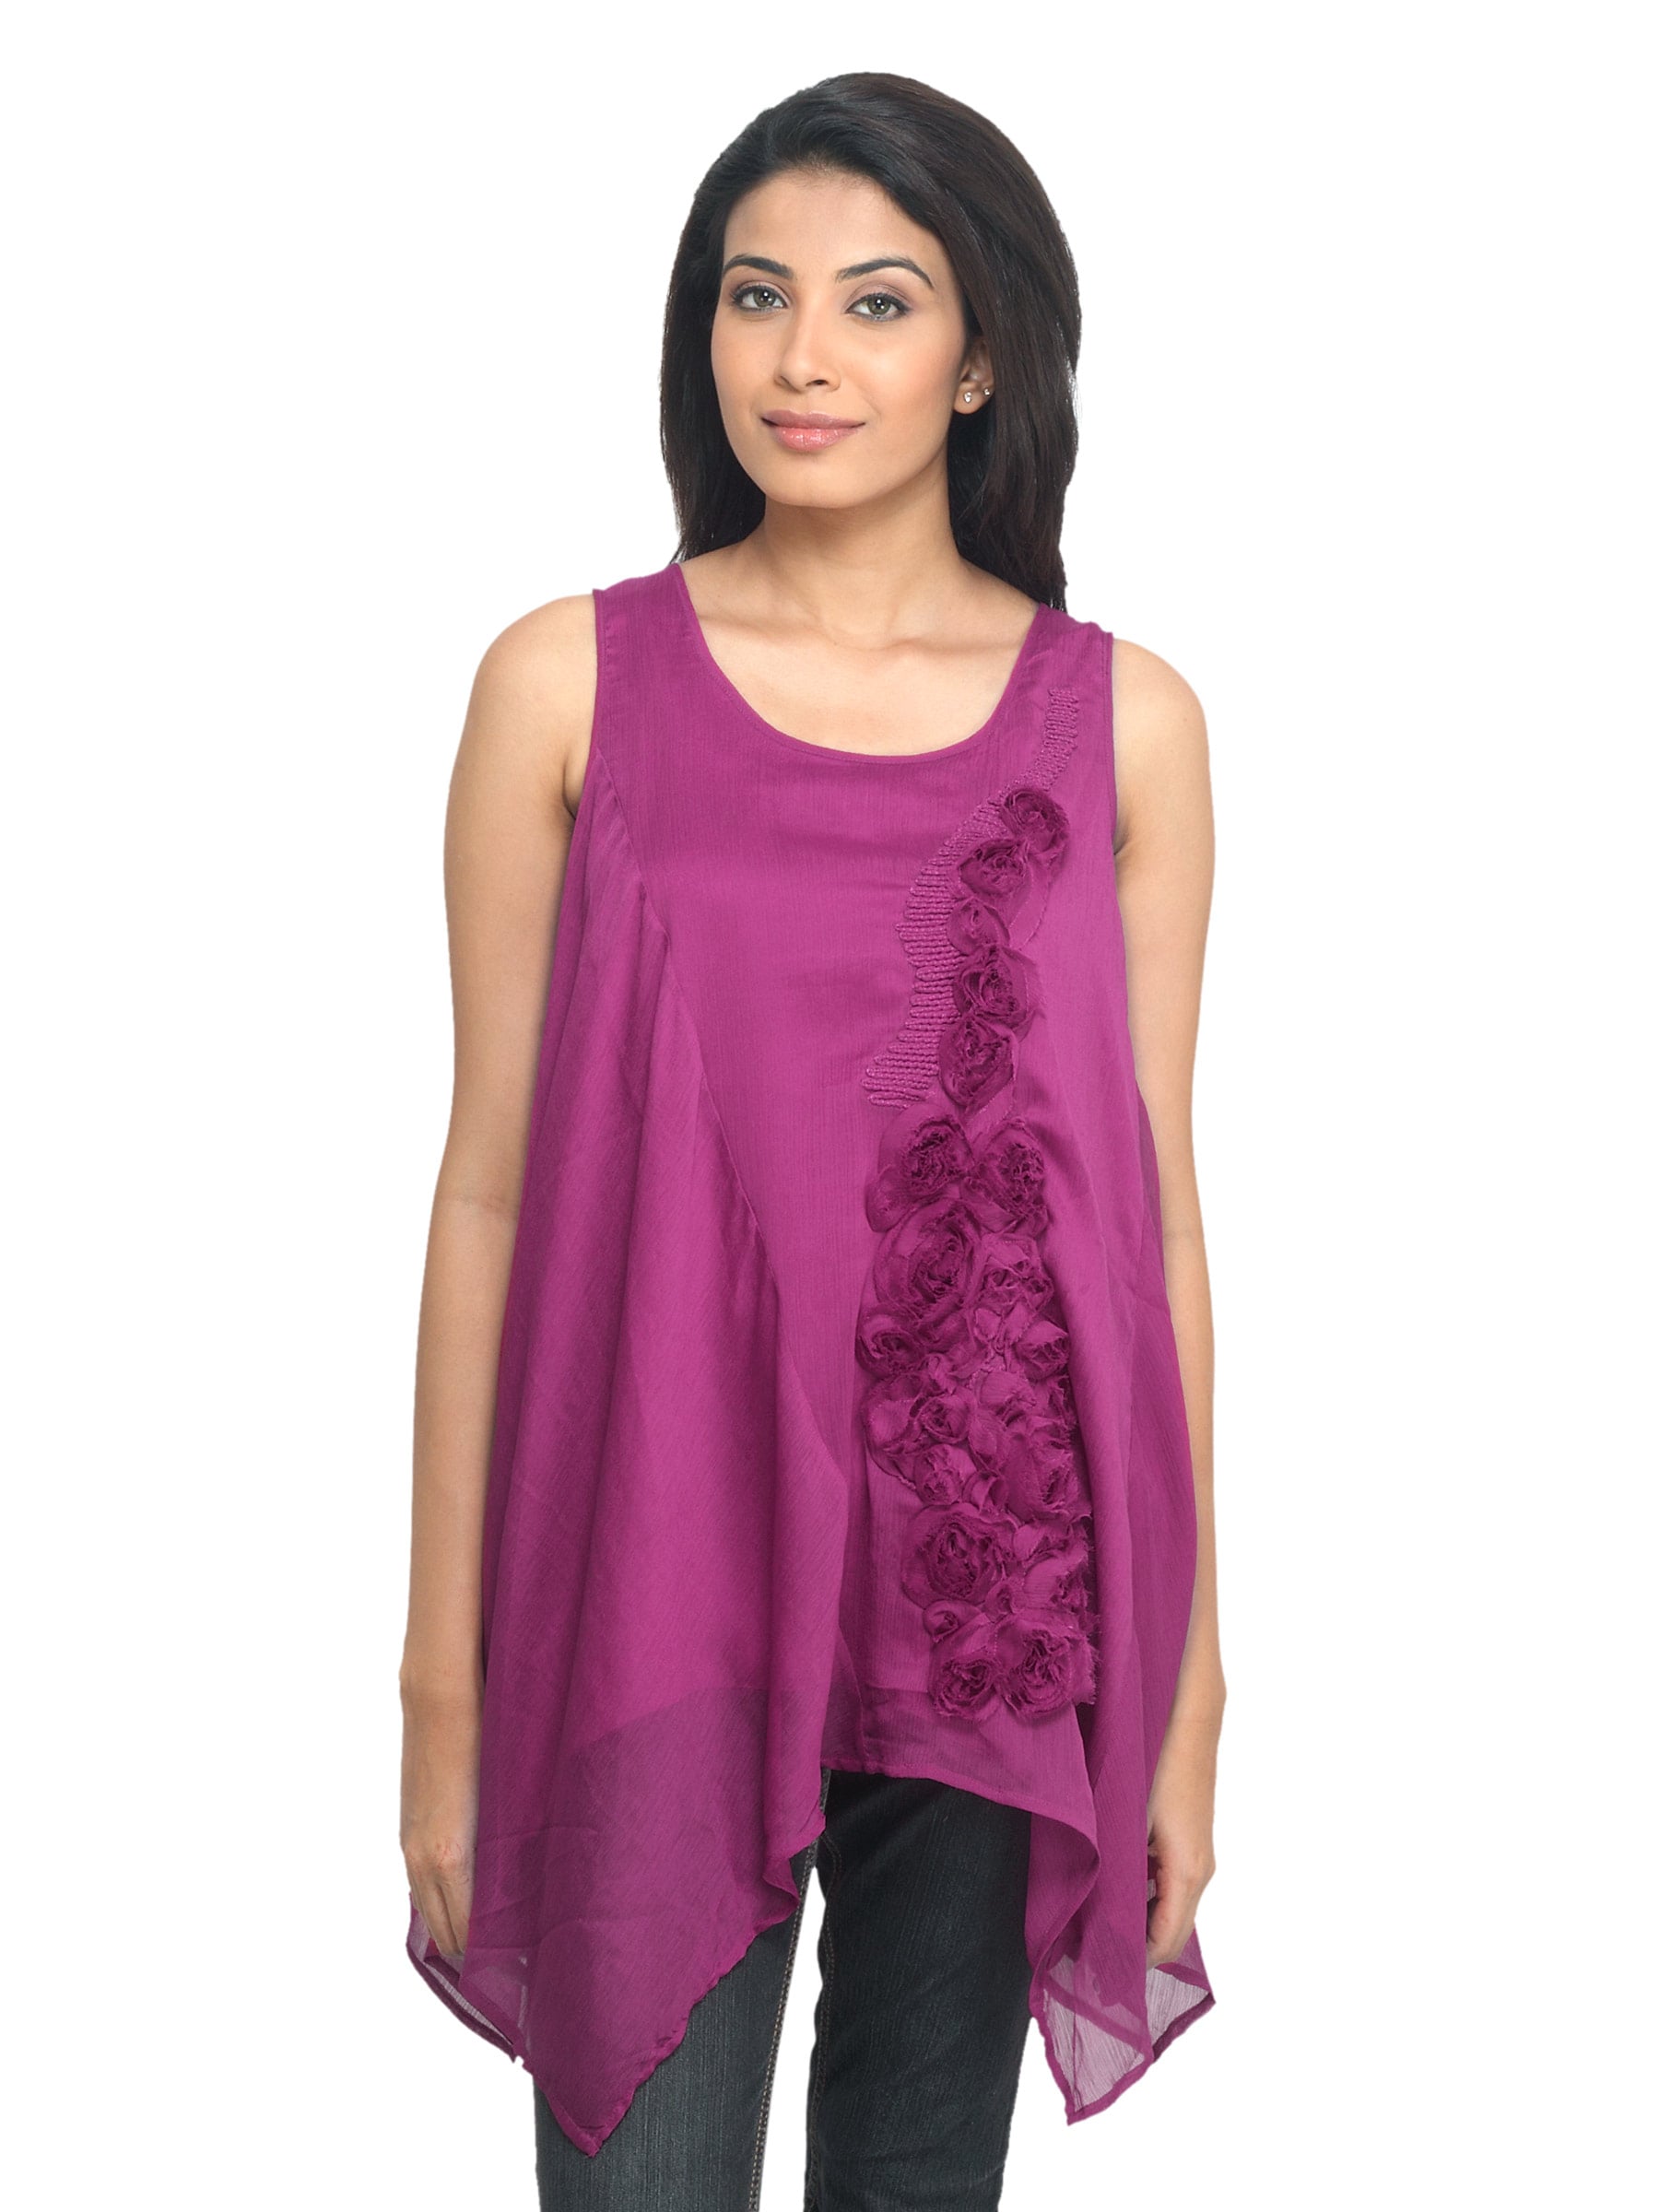 Scullers For Her Women Magenta Top